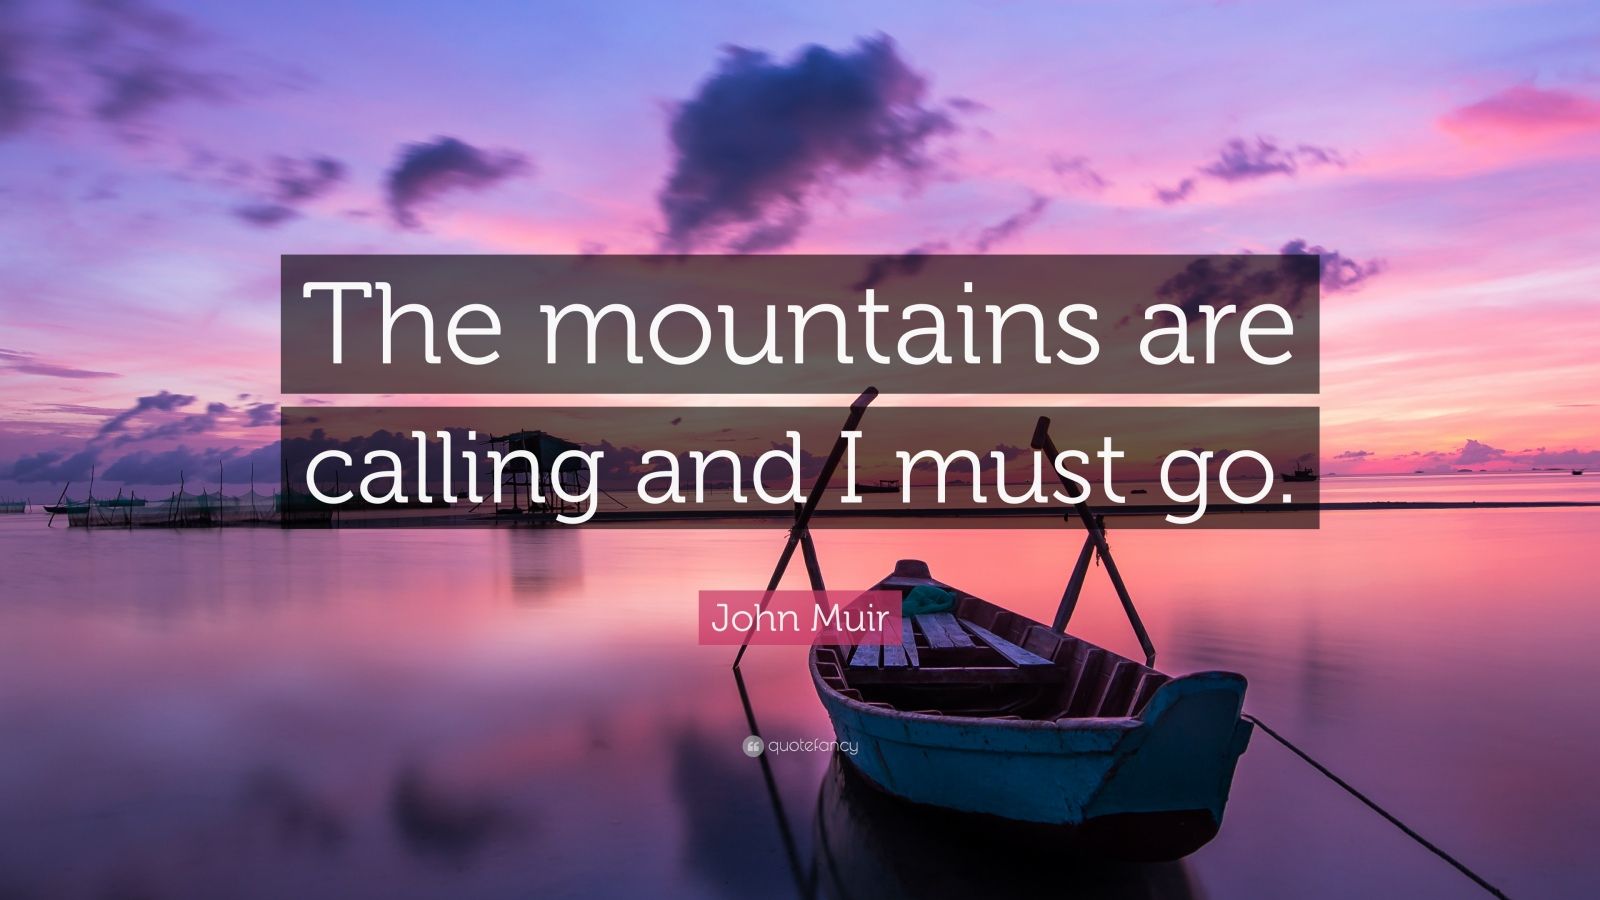 John Muir Quote: "The mountains are calling and I must go." (22 wallpapers) - Quotefancy